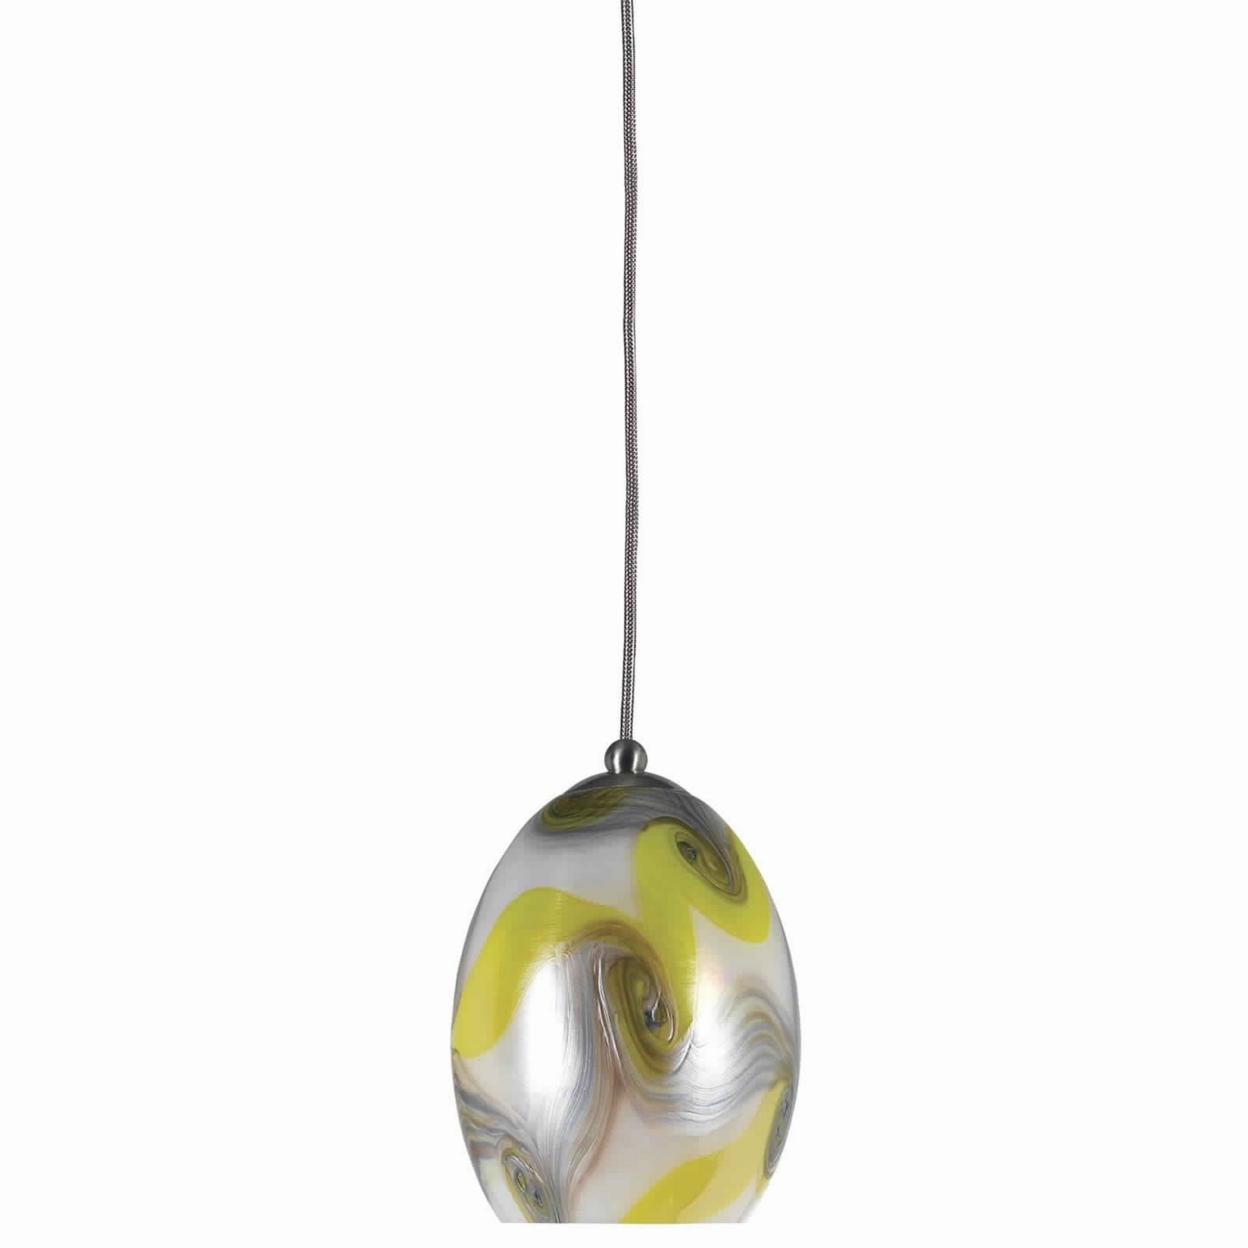 Oval Shade Pendant Lighting With Wave Pattern, Set Of 4, Silver And Yellow- Saltoro Sherpi